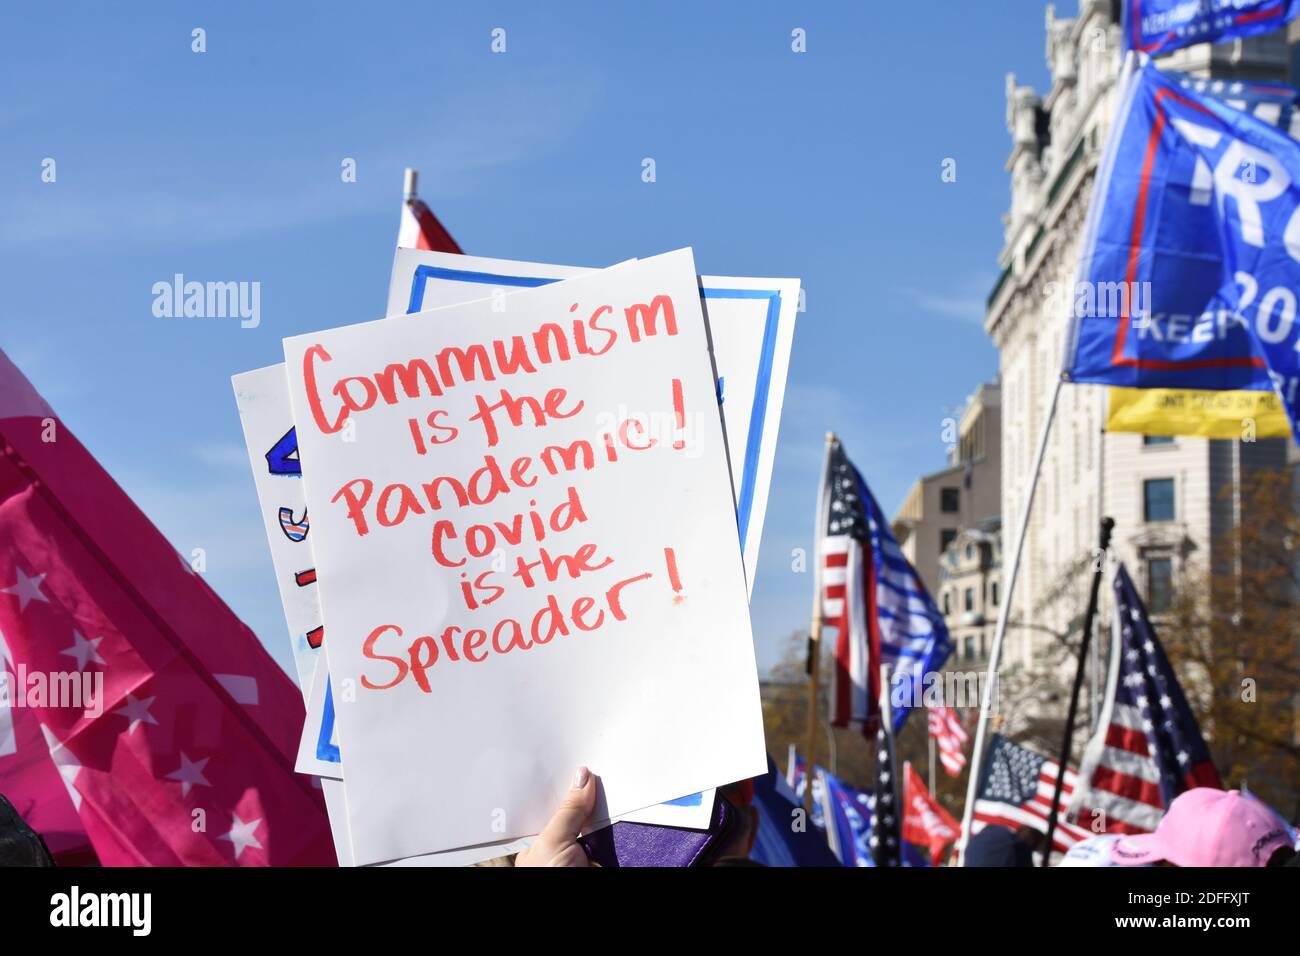 Washington DC. November 14, 2020. Million Maga March. Political sign said “Communism is the pandemic! Covid is the spreader!” at Freedom plaza. Stock Photo